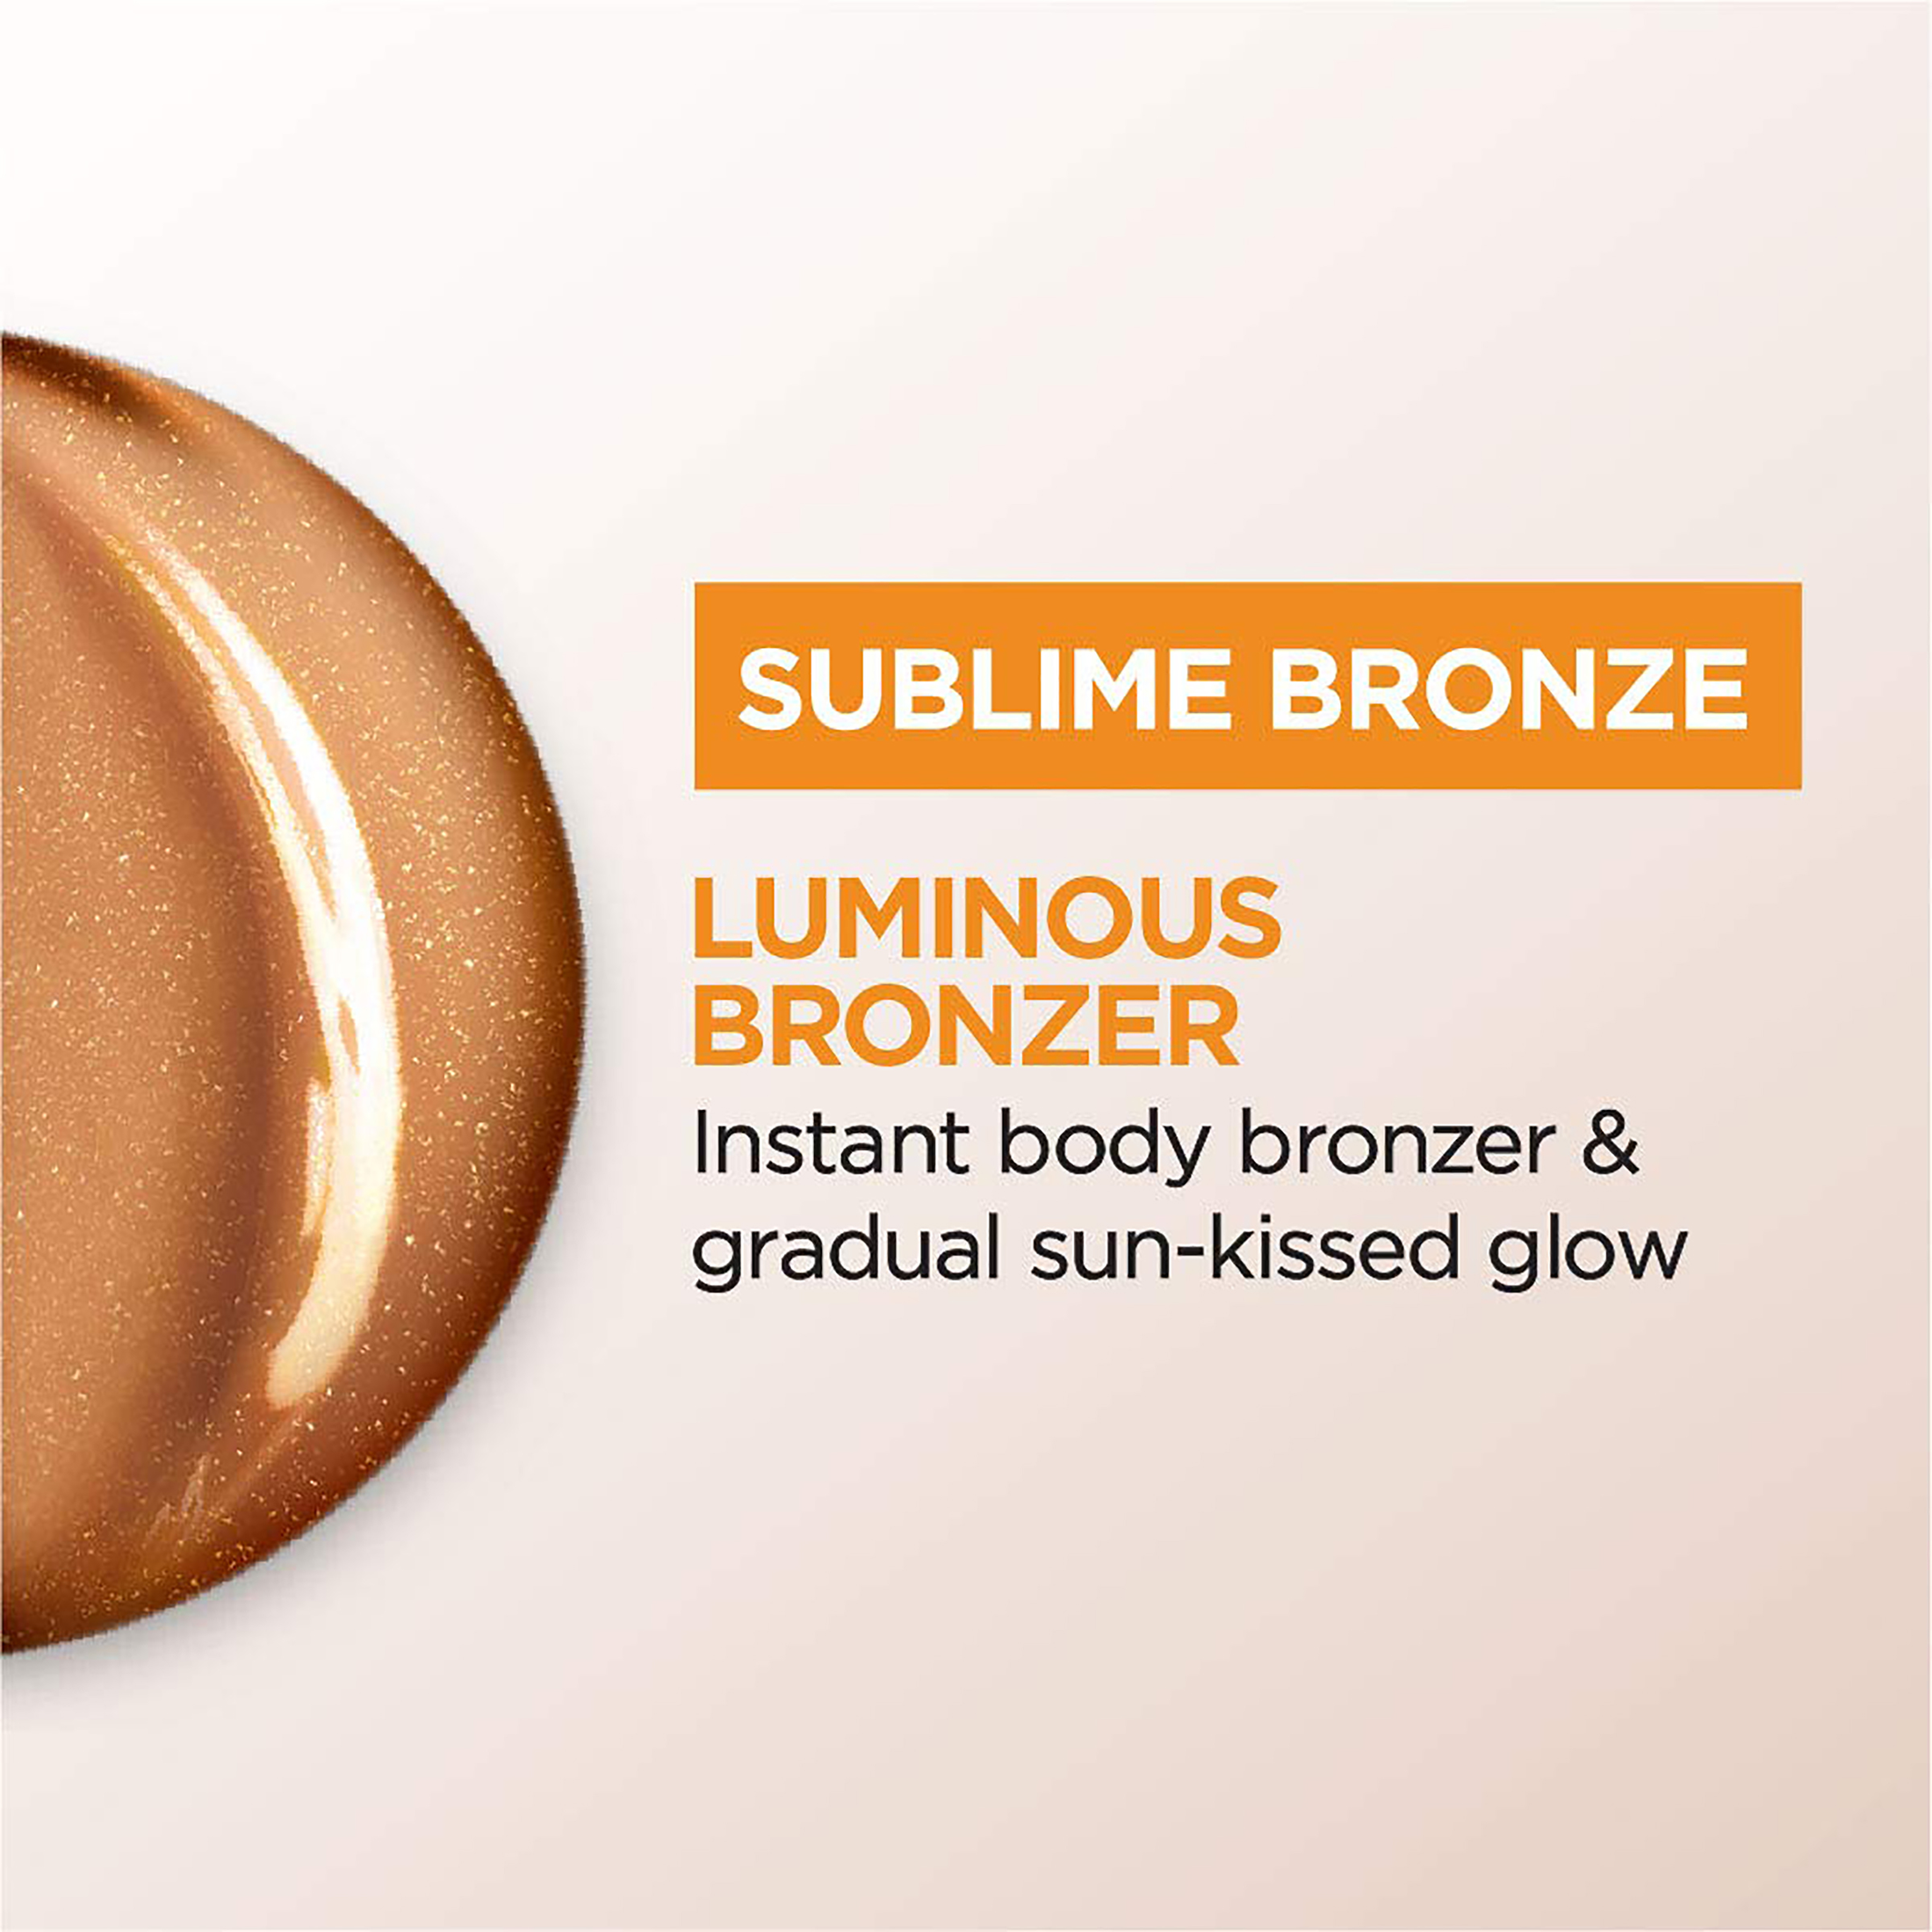 L'Oreal Paris Sublime Bronze Tinted Self-Tanning Lotion for Face, Deep, 5 fl oz - image 3 of 6